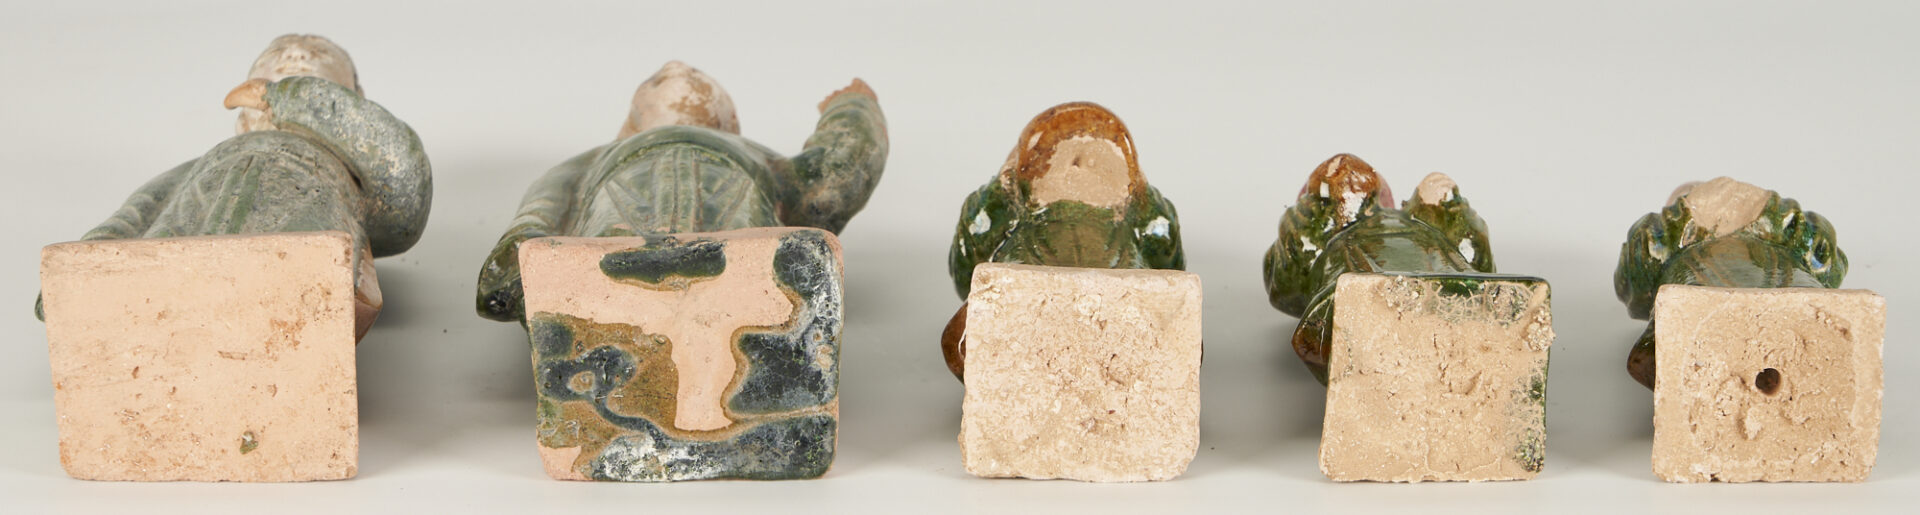 Lot 233: 13 Chinese Sancai Glazed Figural Roof Tiles & Tomb Figures, incl. Shouxing